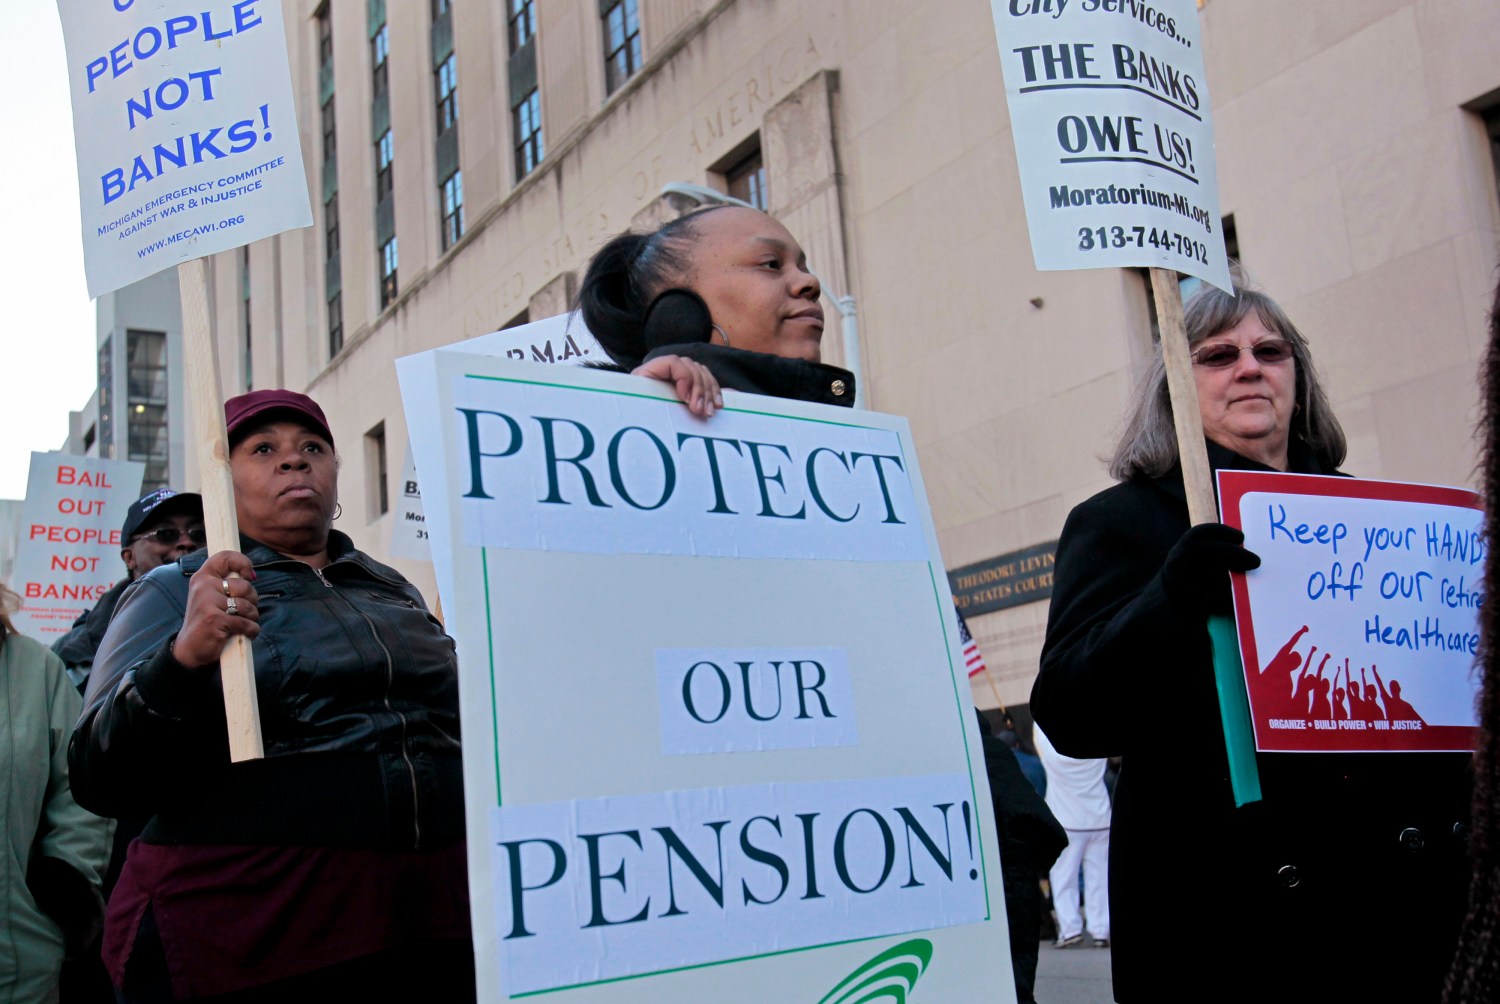 Protesters seek to protect pensions